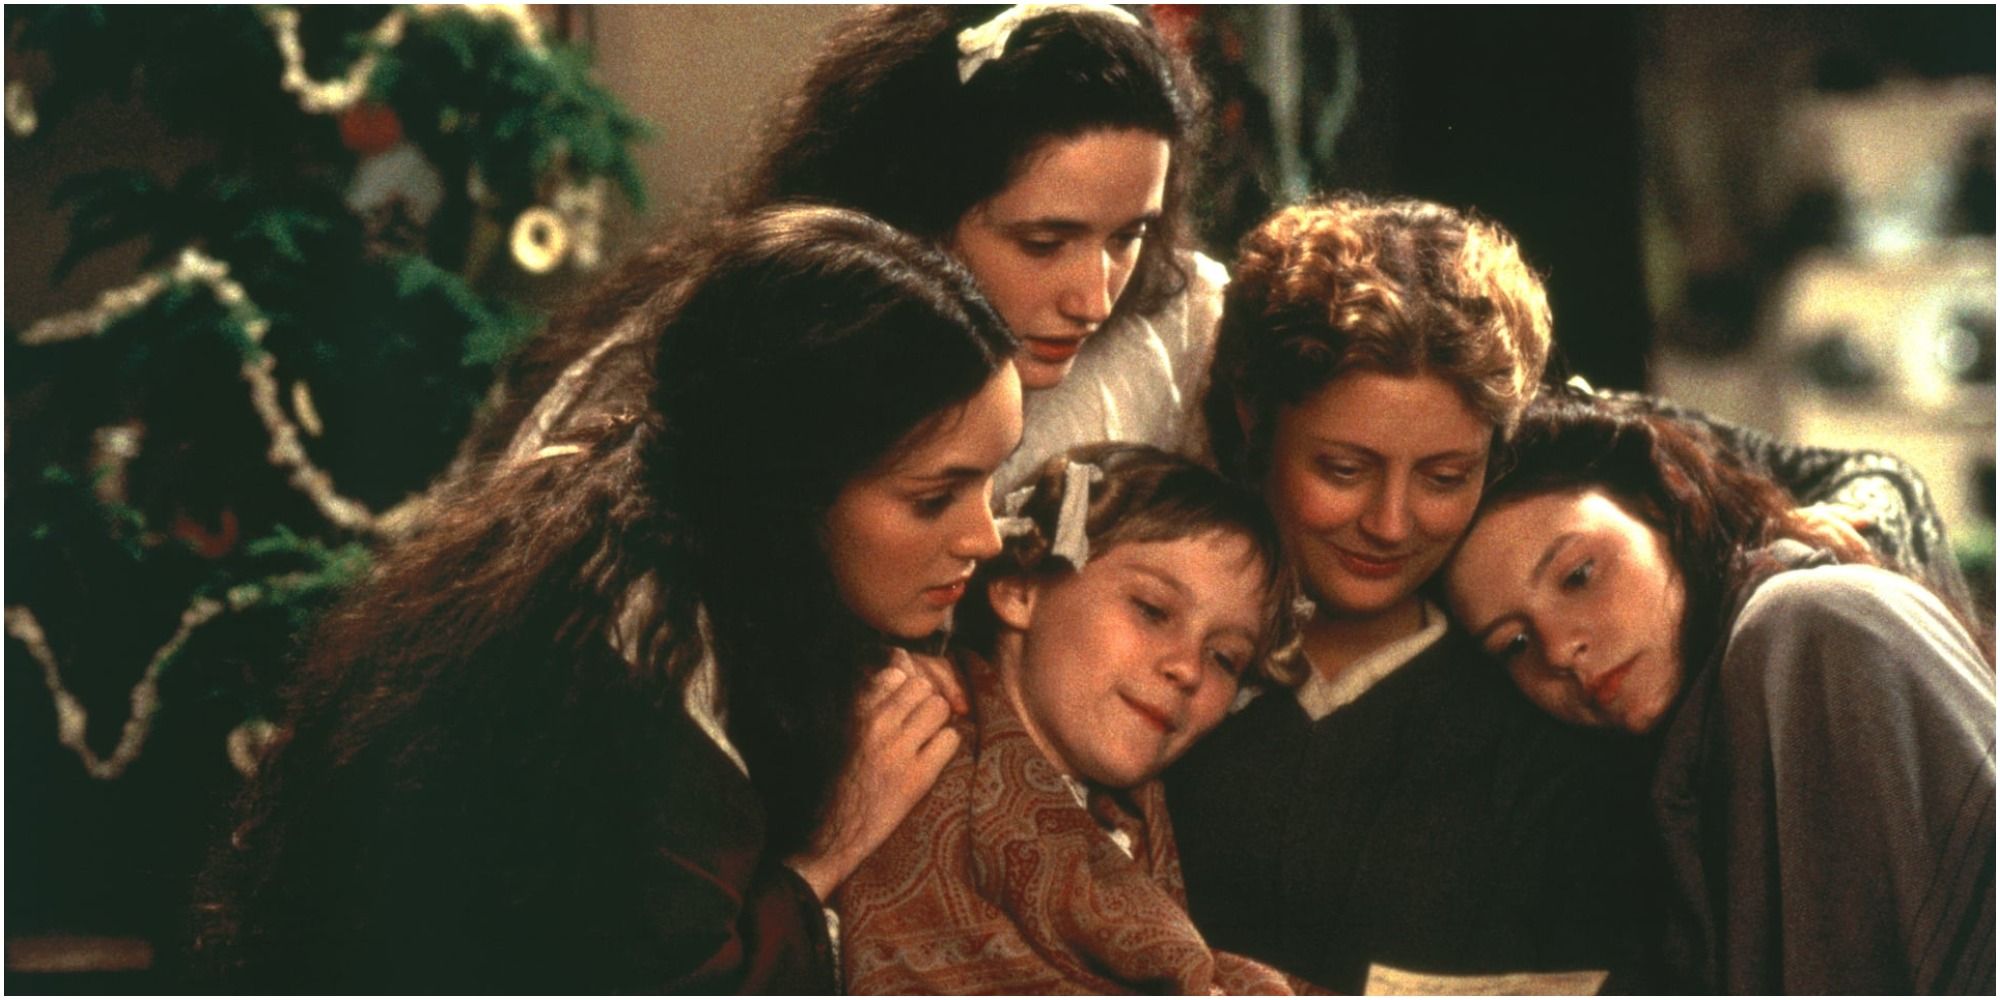 The Marches huddle together in Little Women.